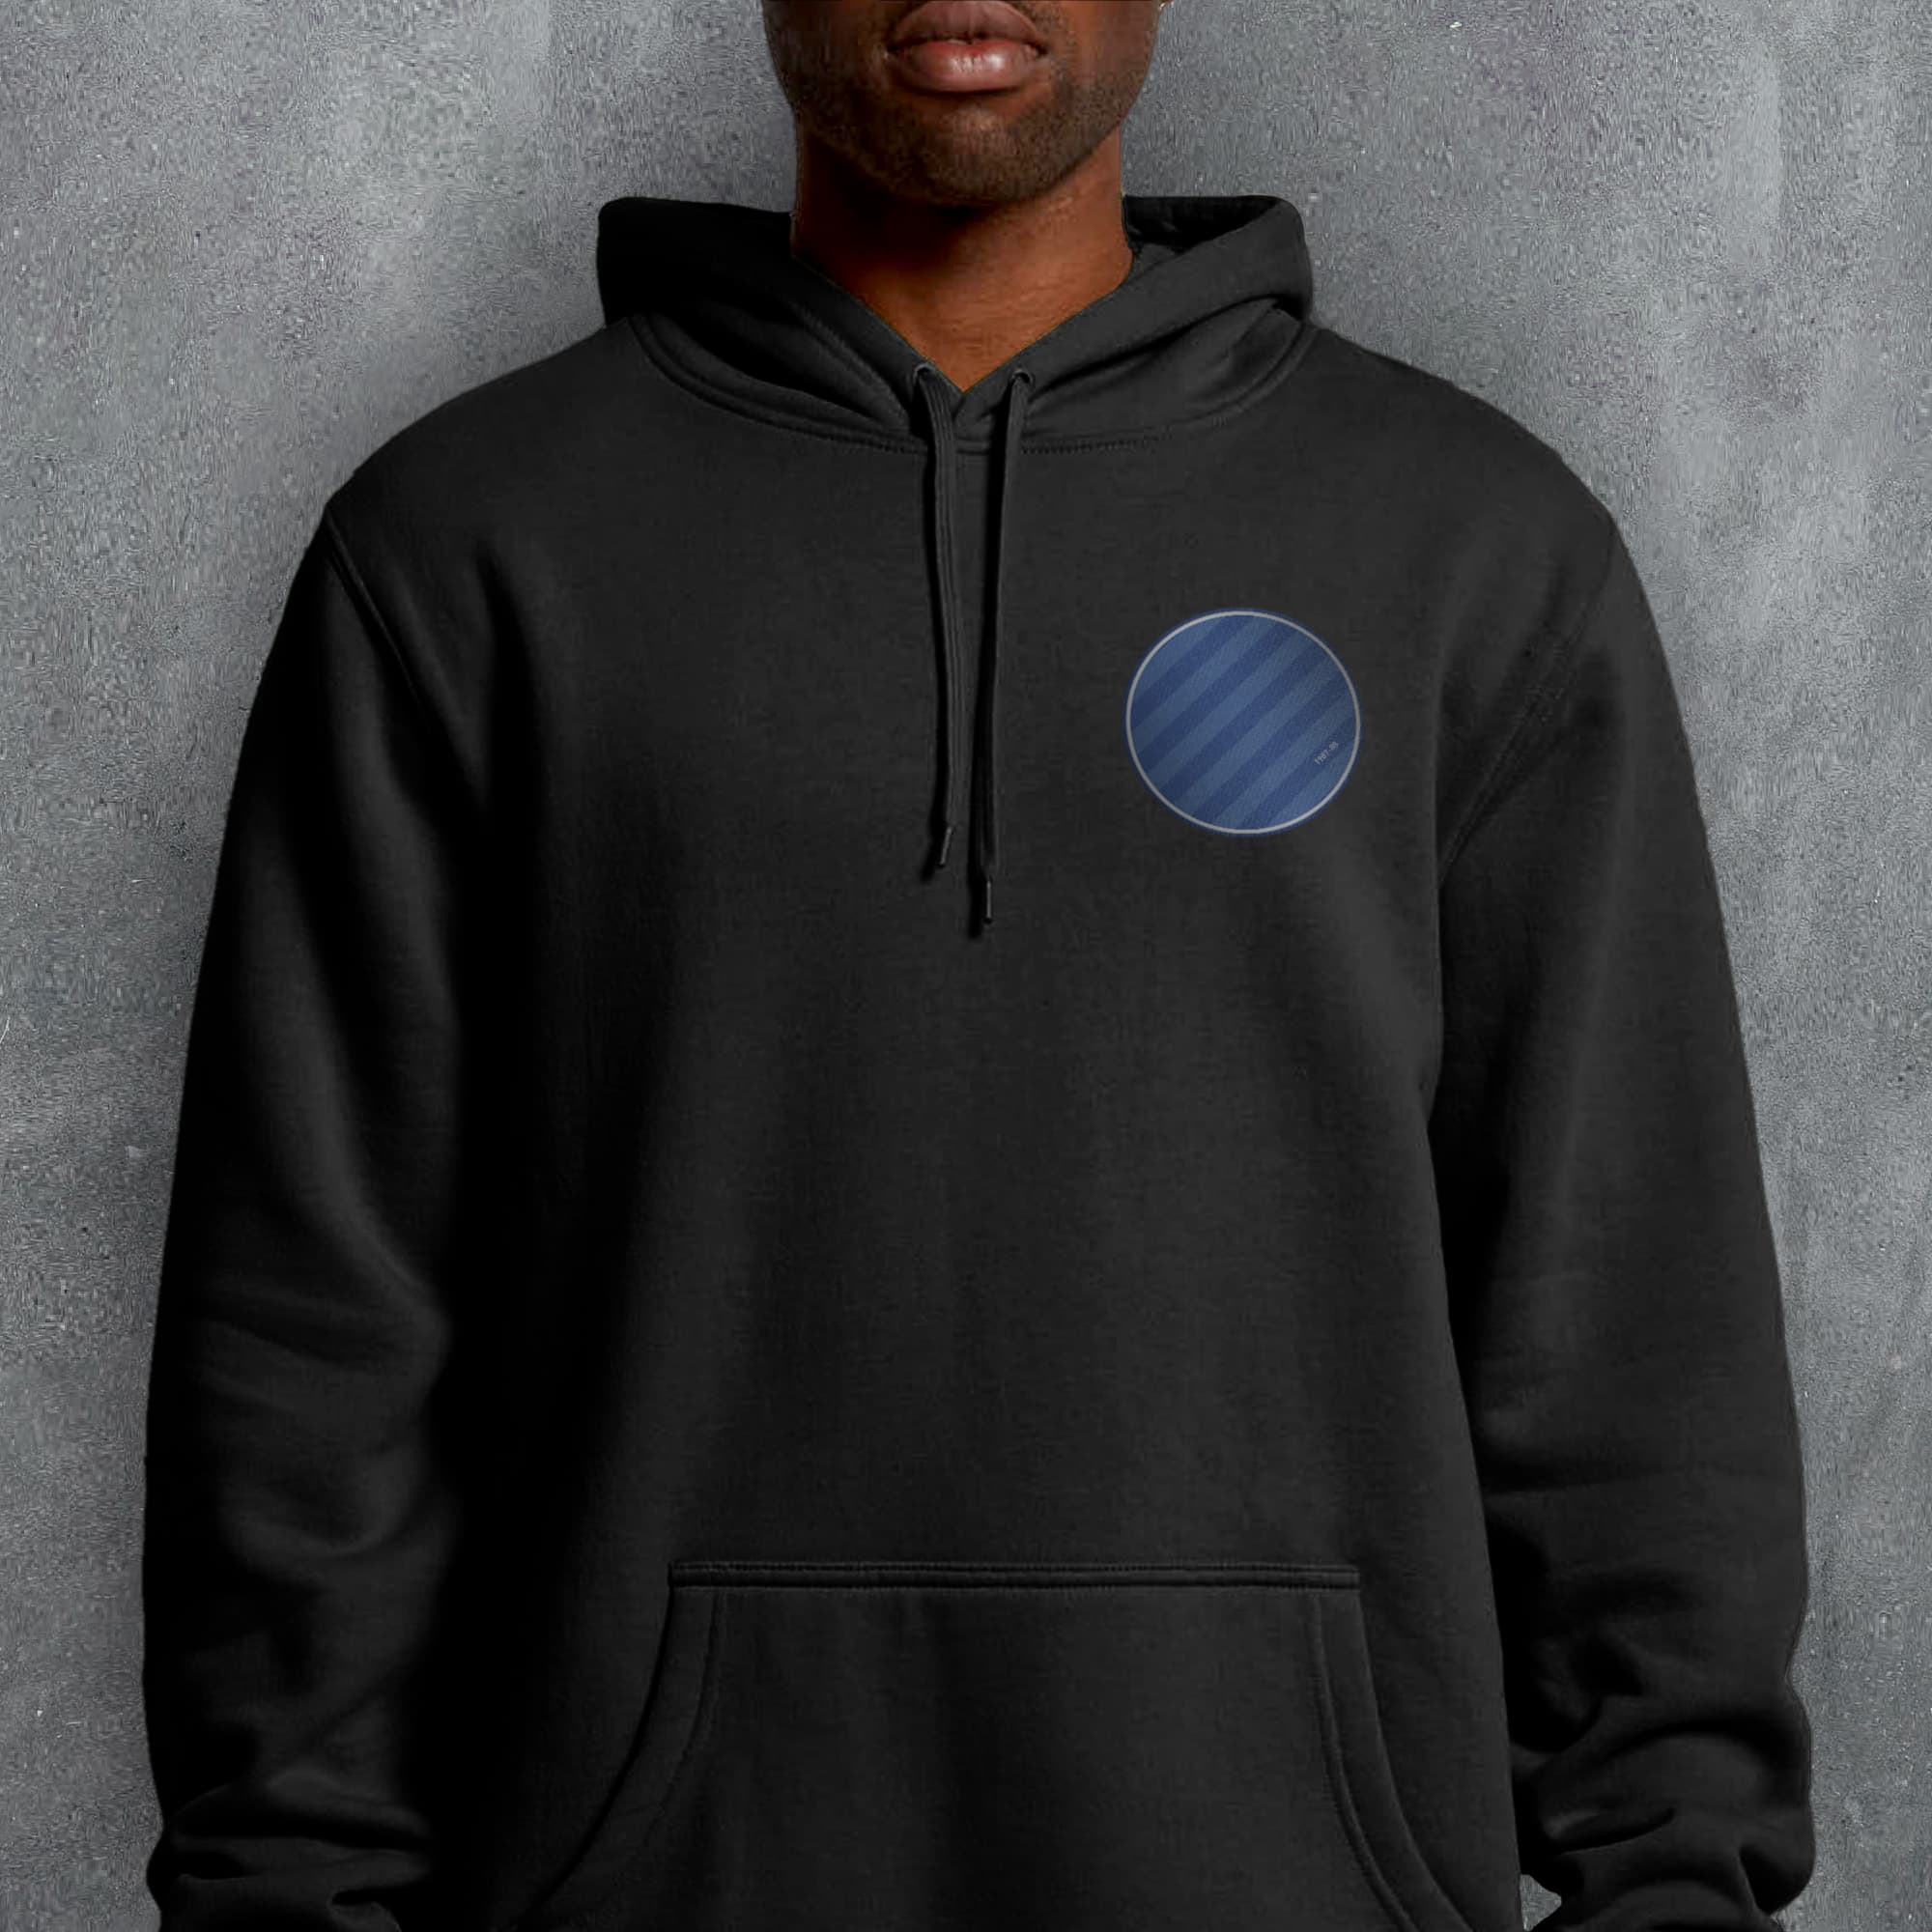 a man wearing a black hoodie with a blue circle on it